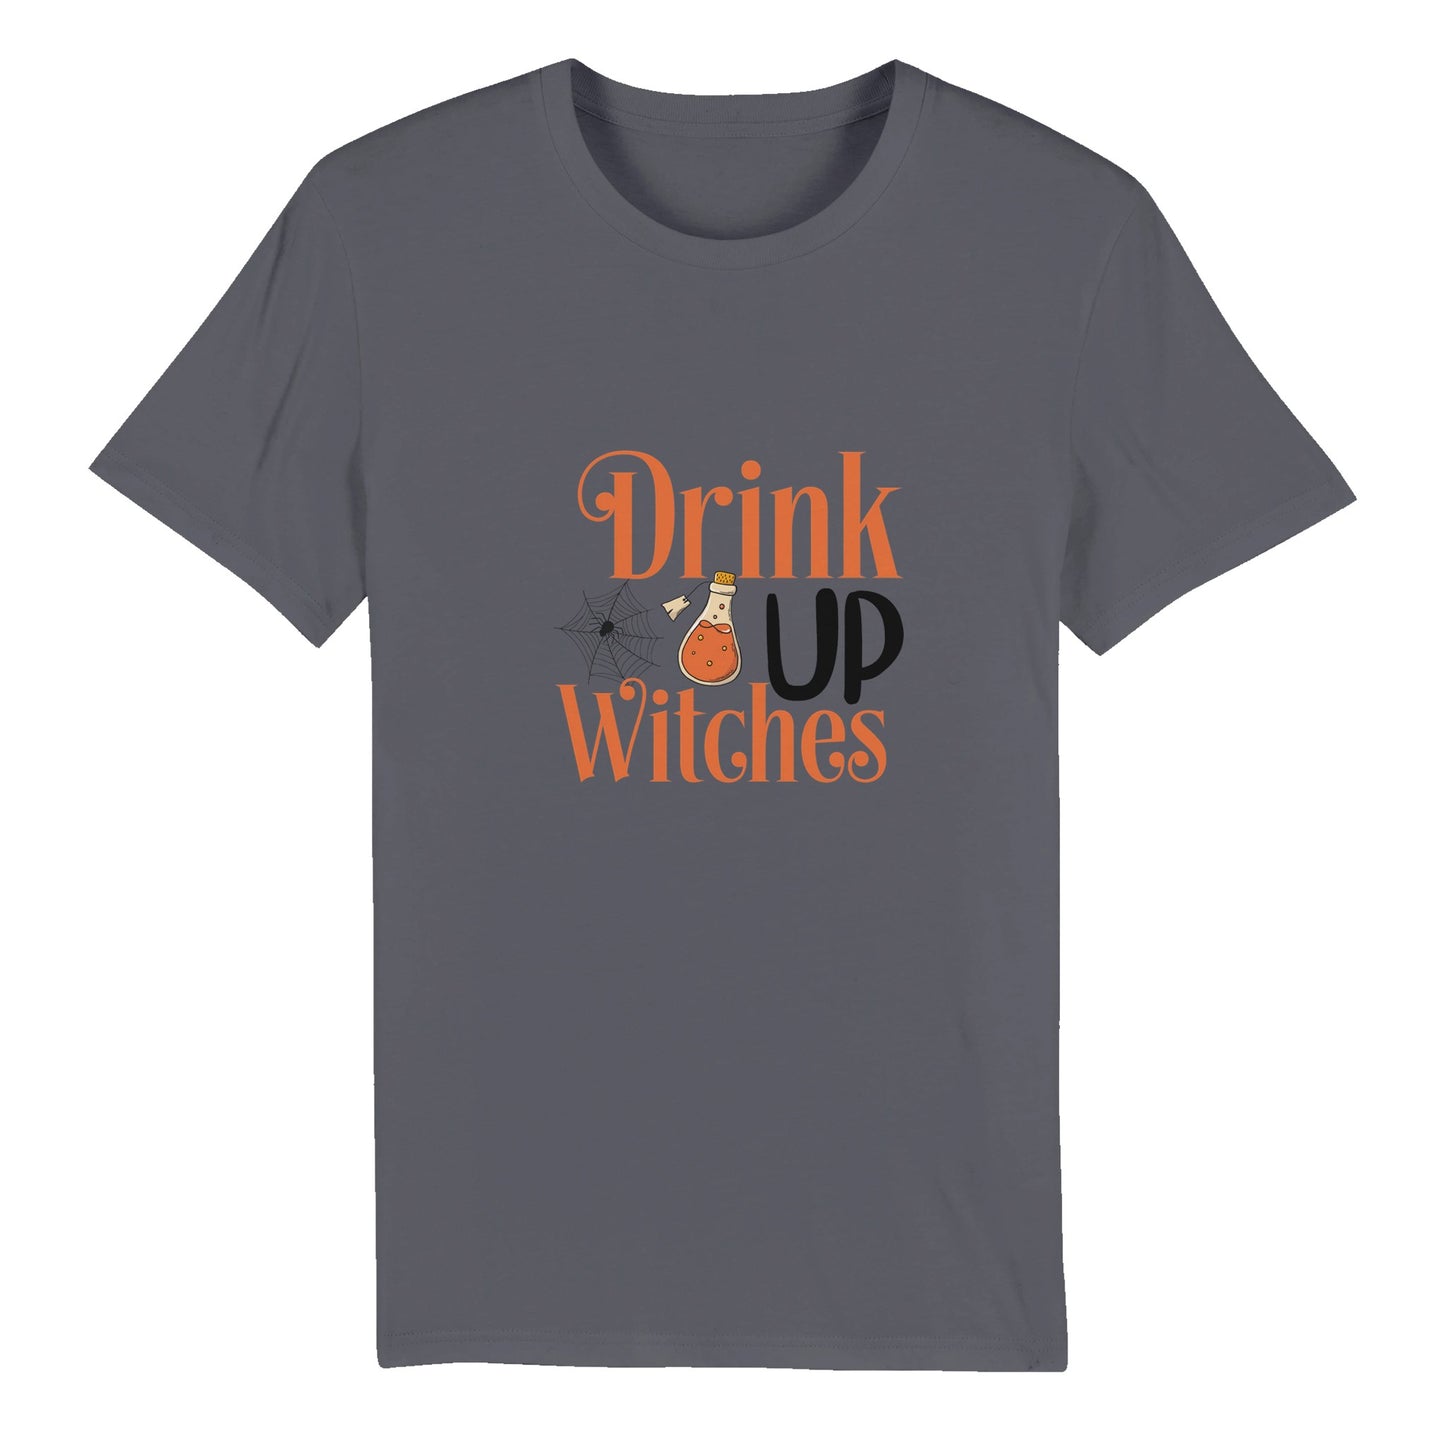 100% Organic Unisex T-shirt/Drink-Up-Witches